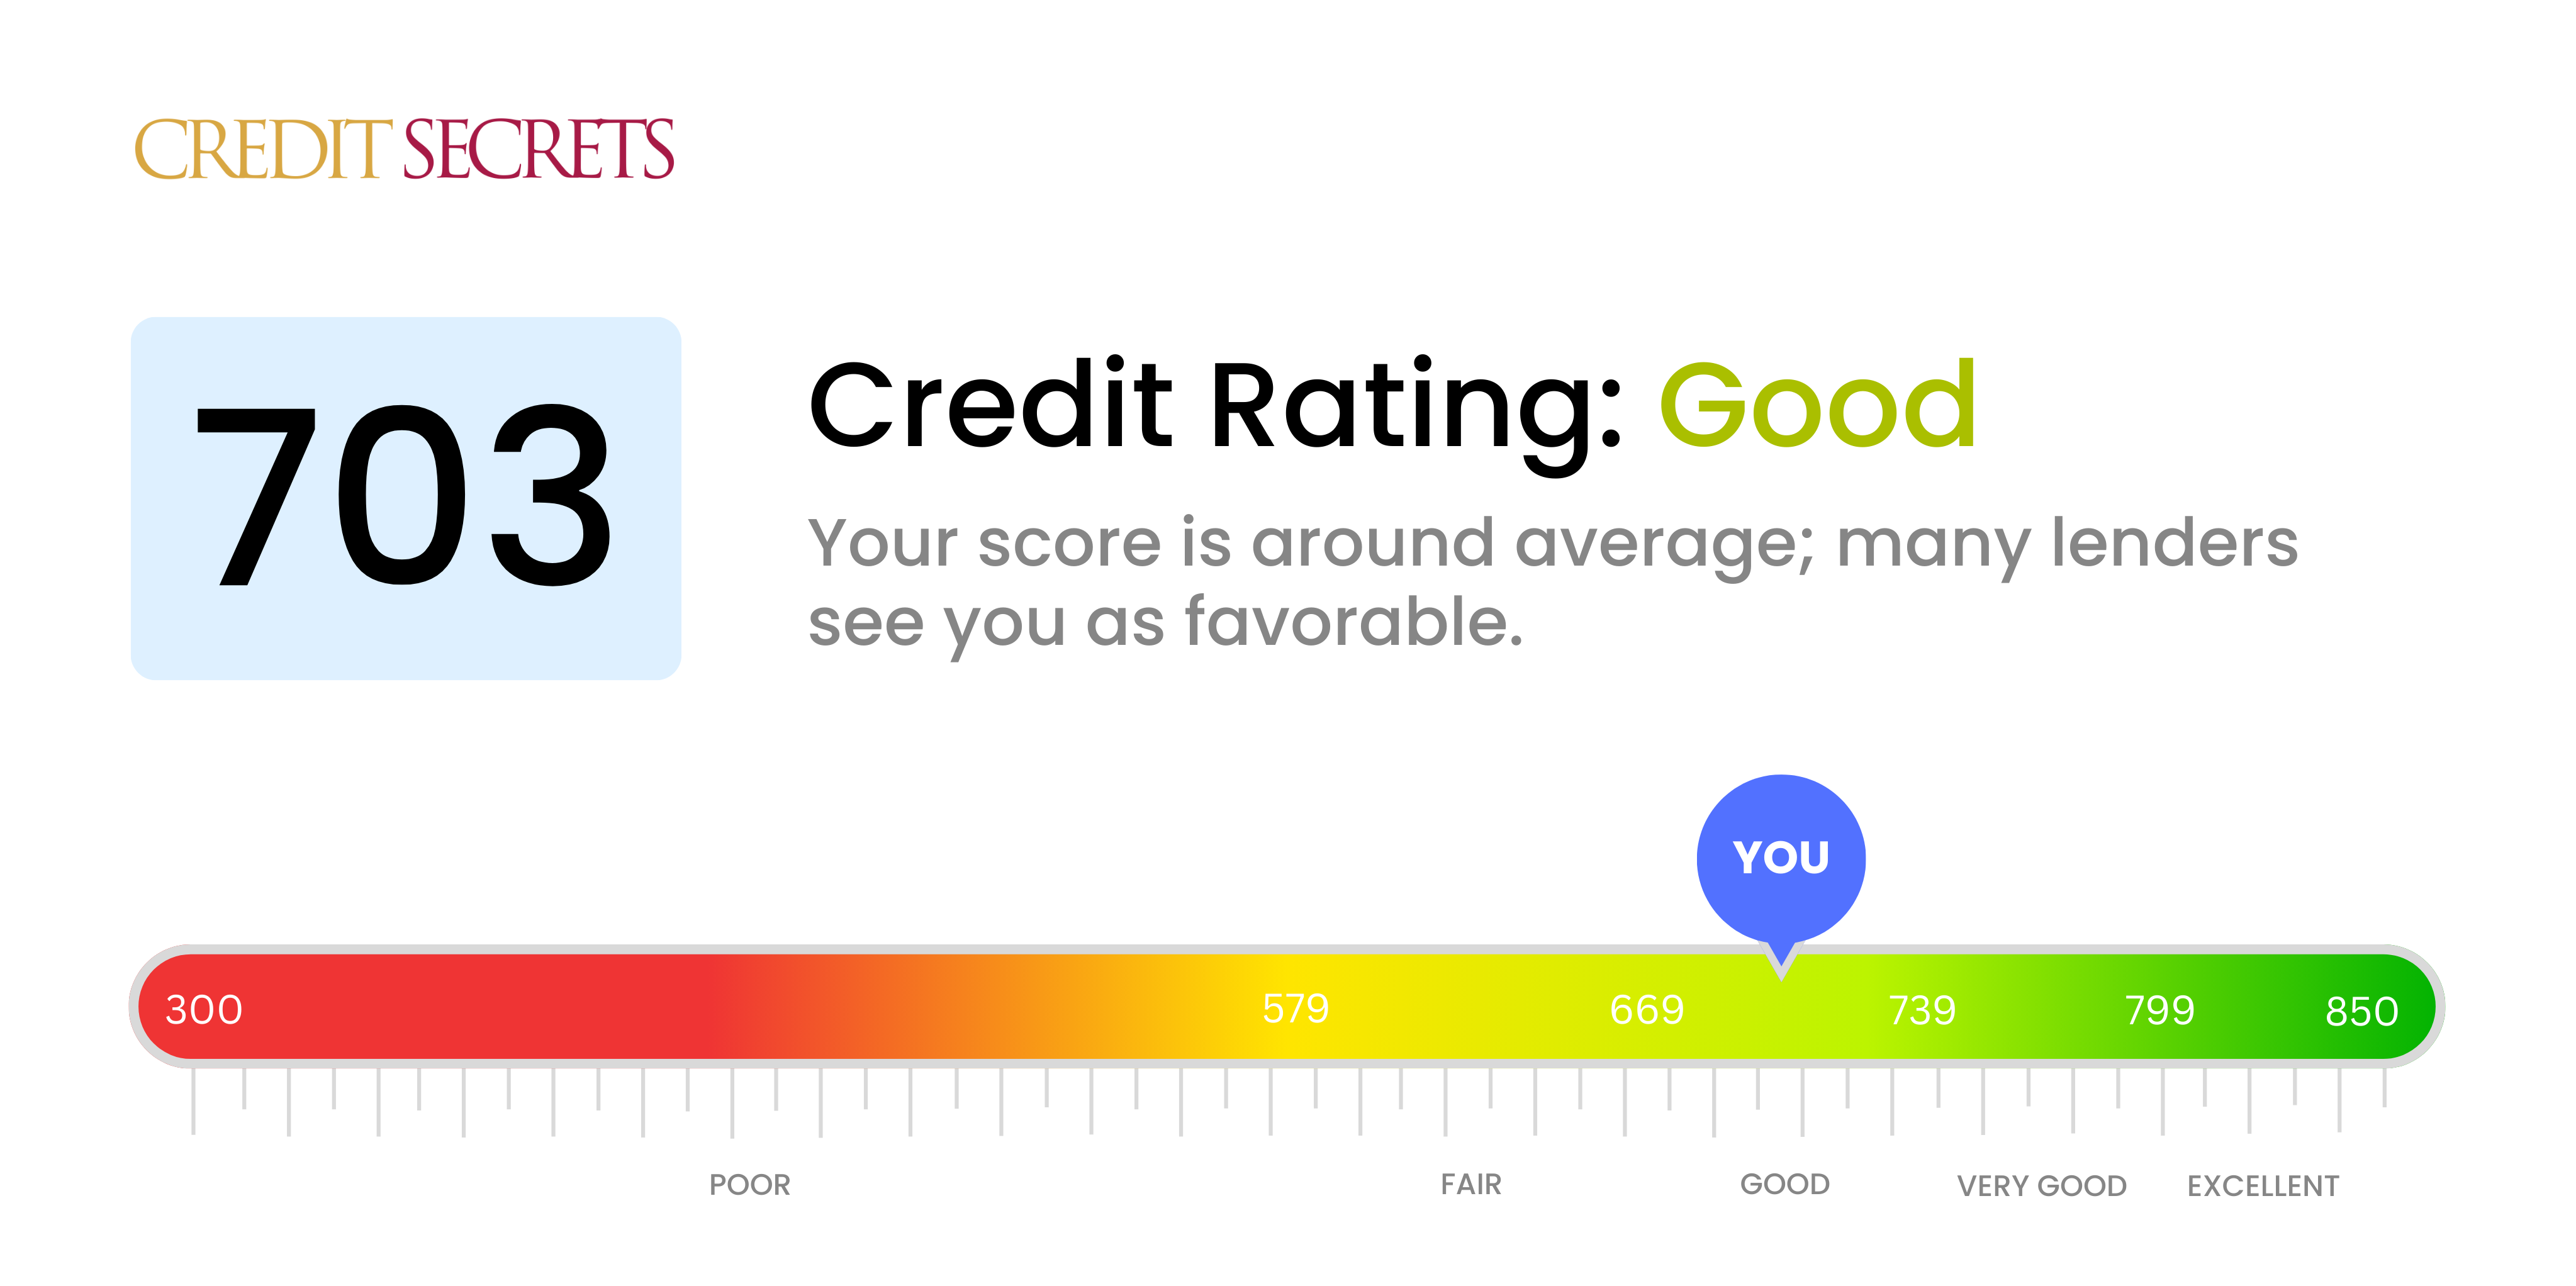 Is 703 a good credit score?